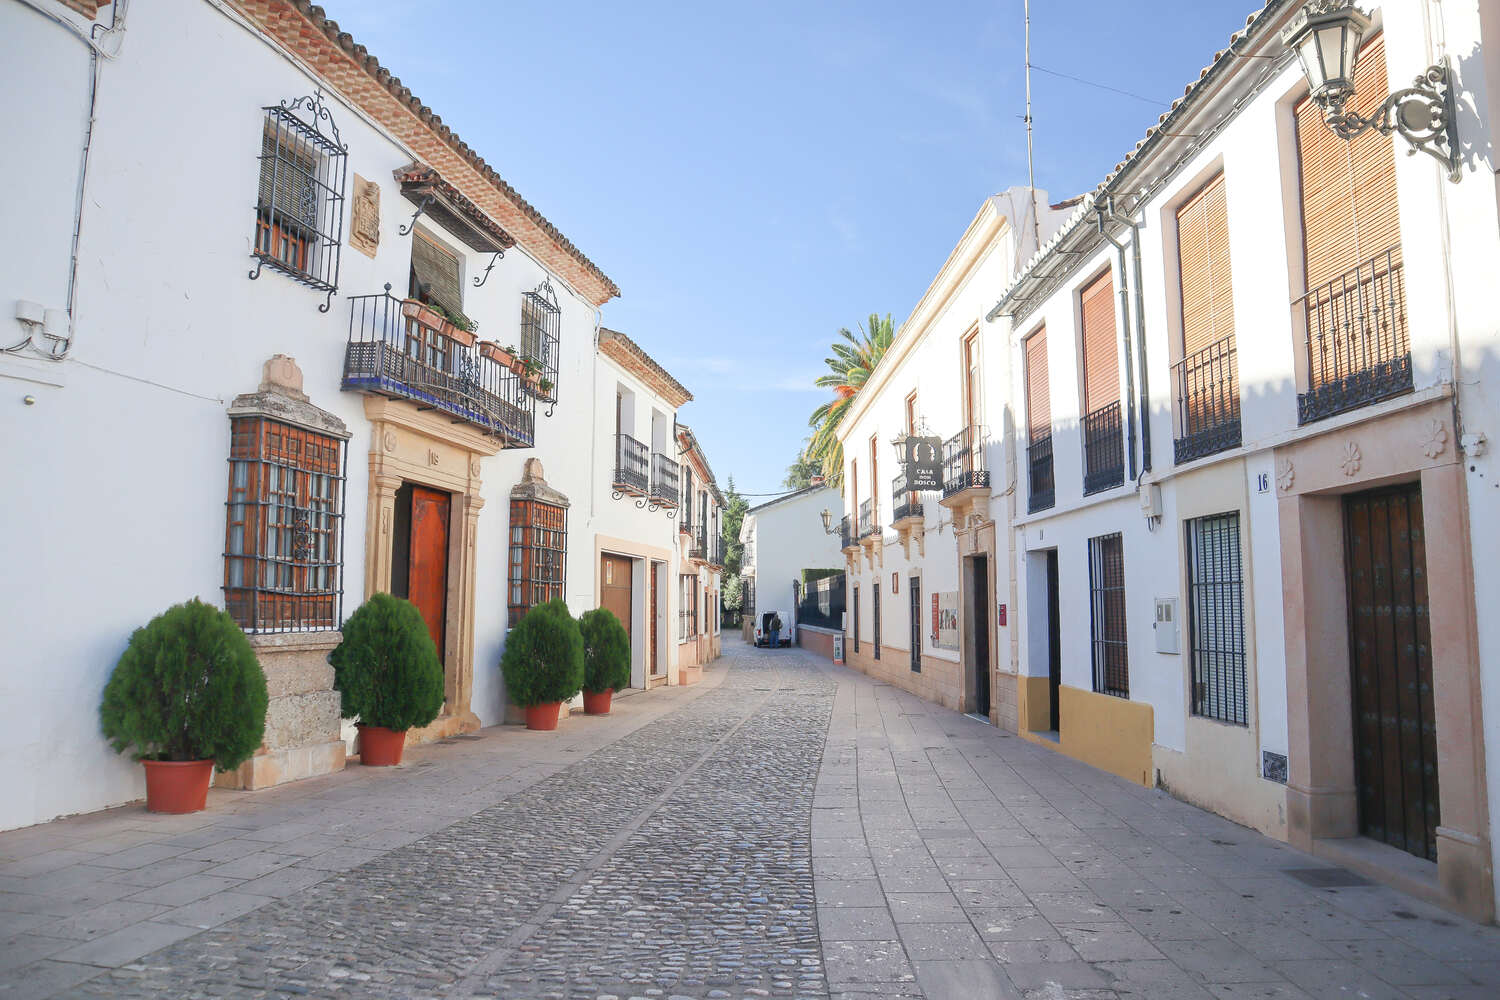 Taking a Stroll in Ronda Old Town - Is Ronda Worth Visiting